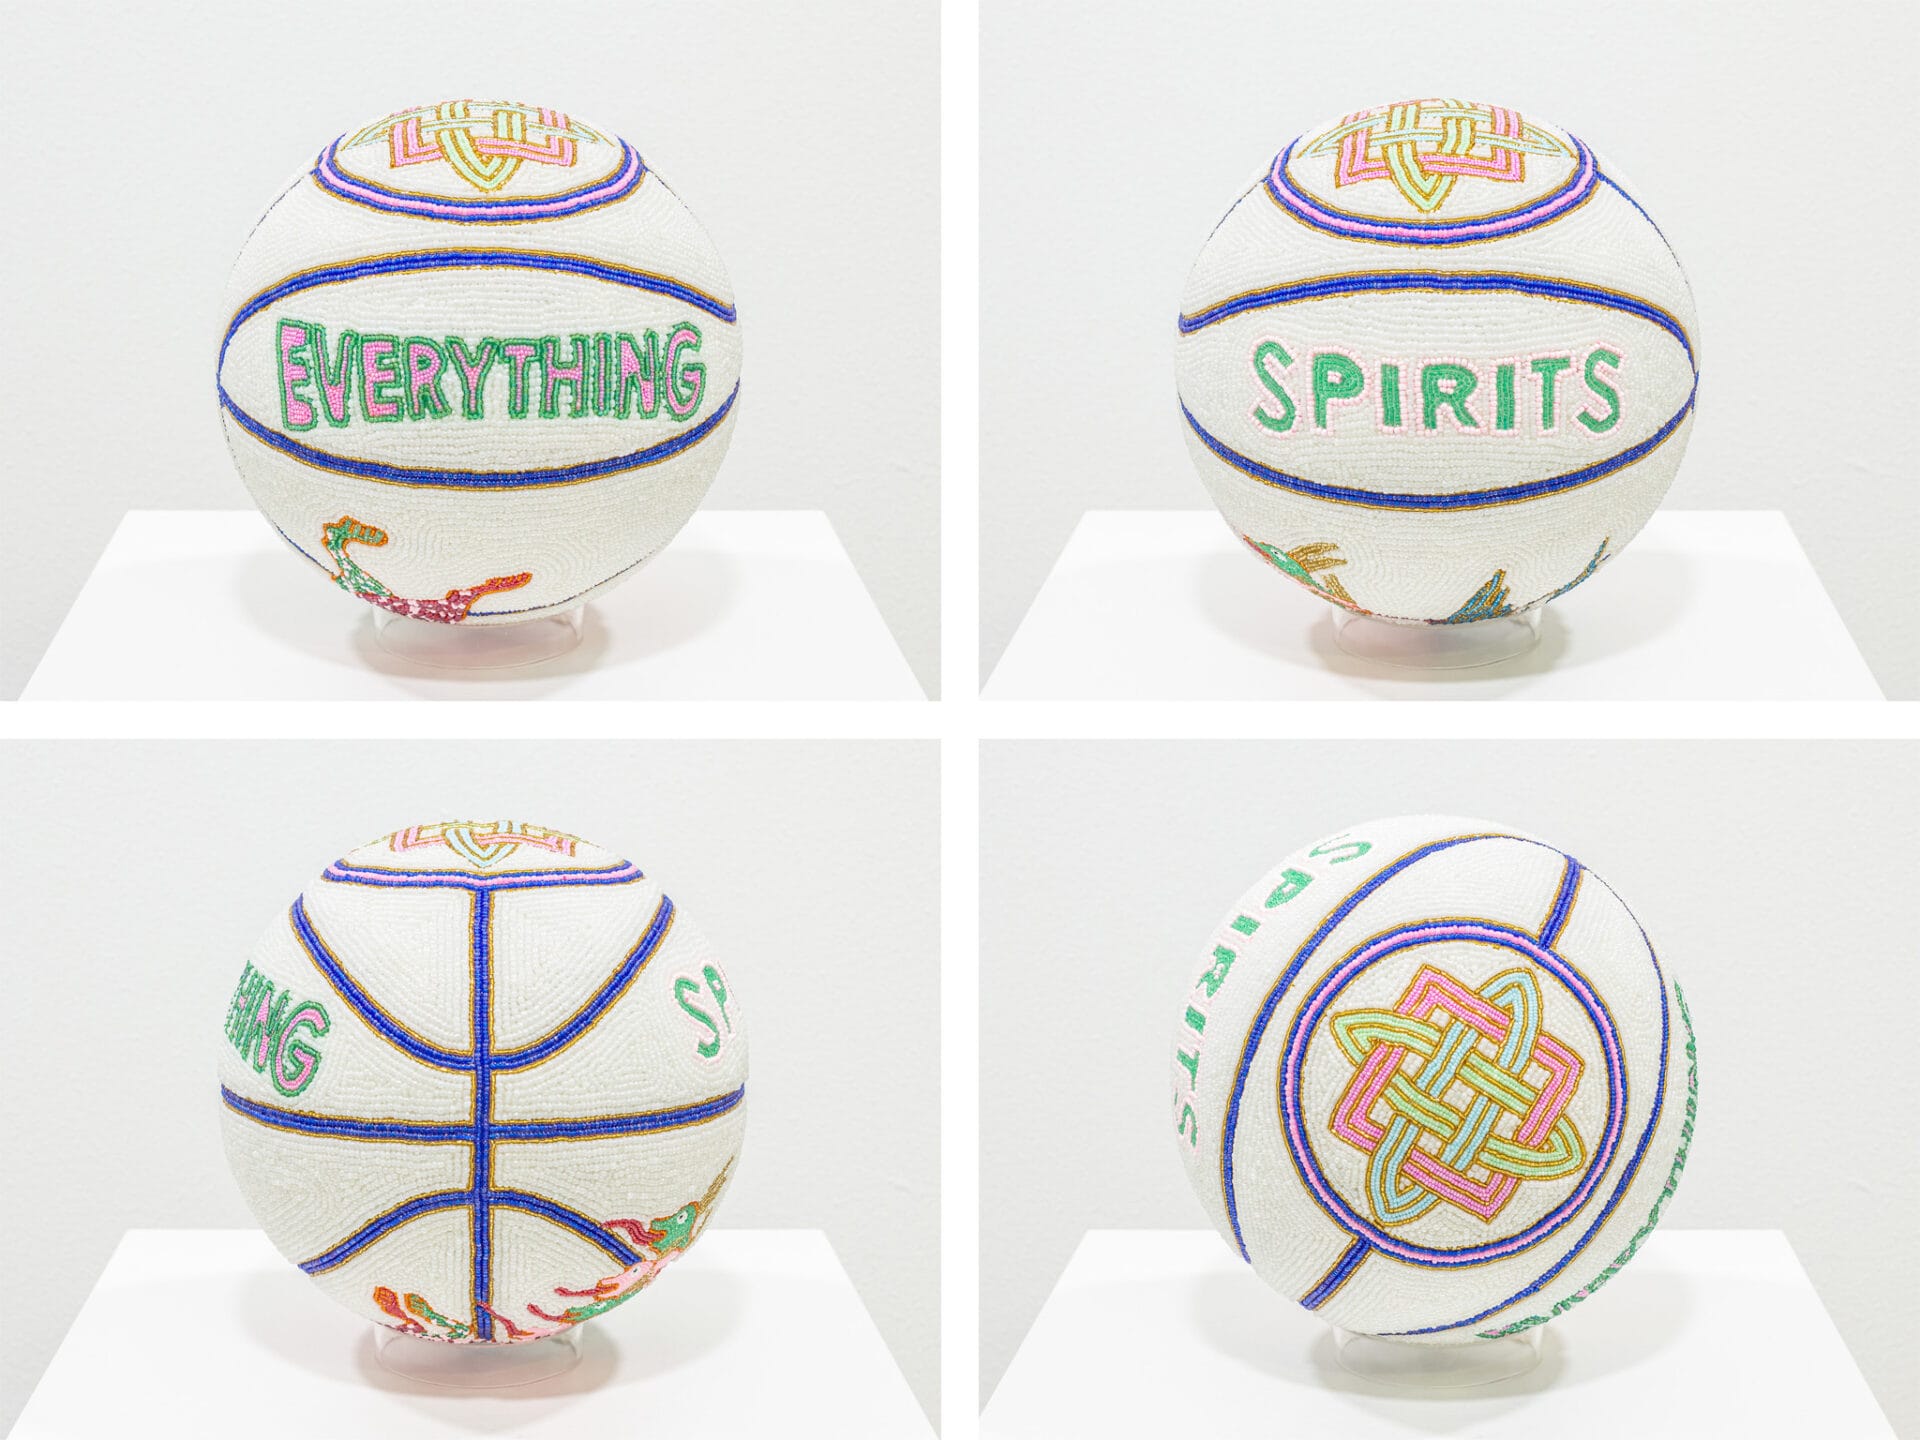 a four-up image of different views of a white glass bead-coated spherical sculpture made from a basketball depicting the words "everything" and "spirits" and a Celtic knot